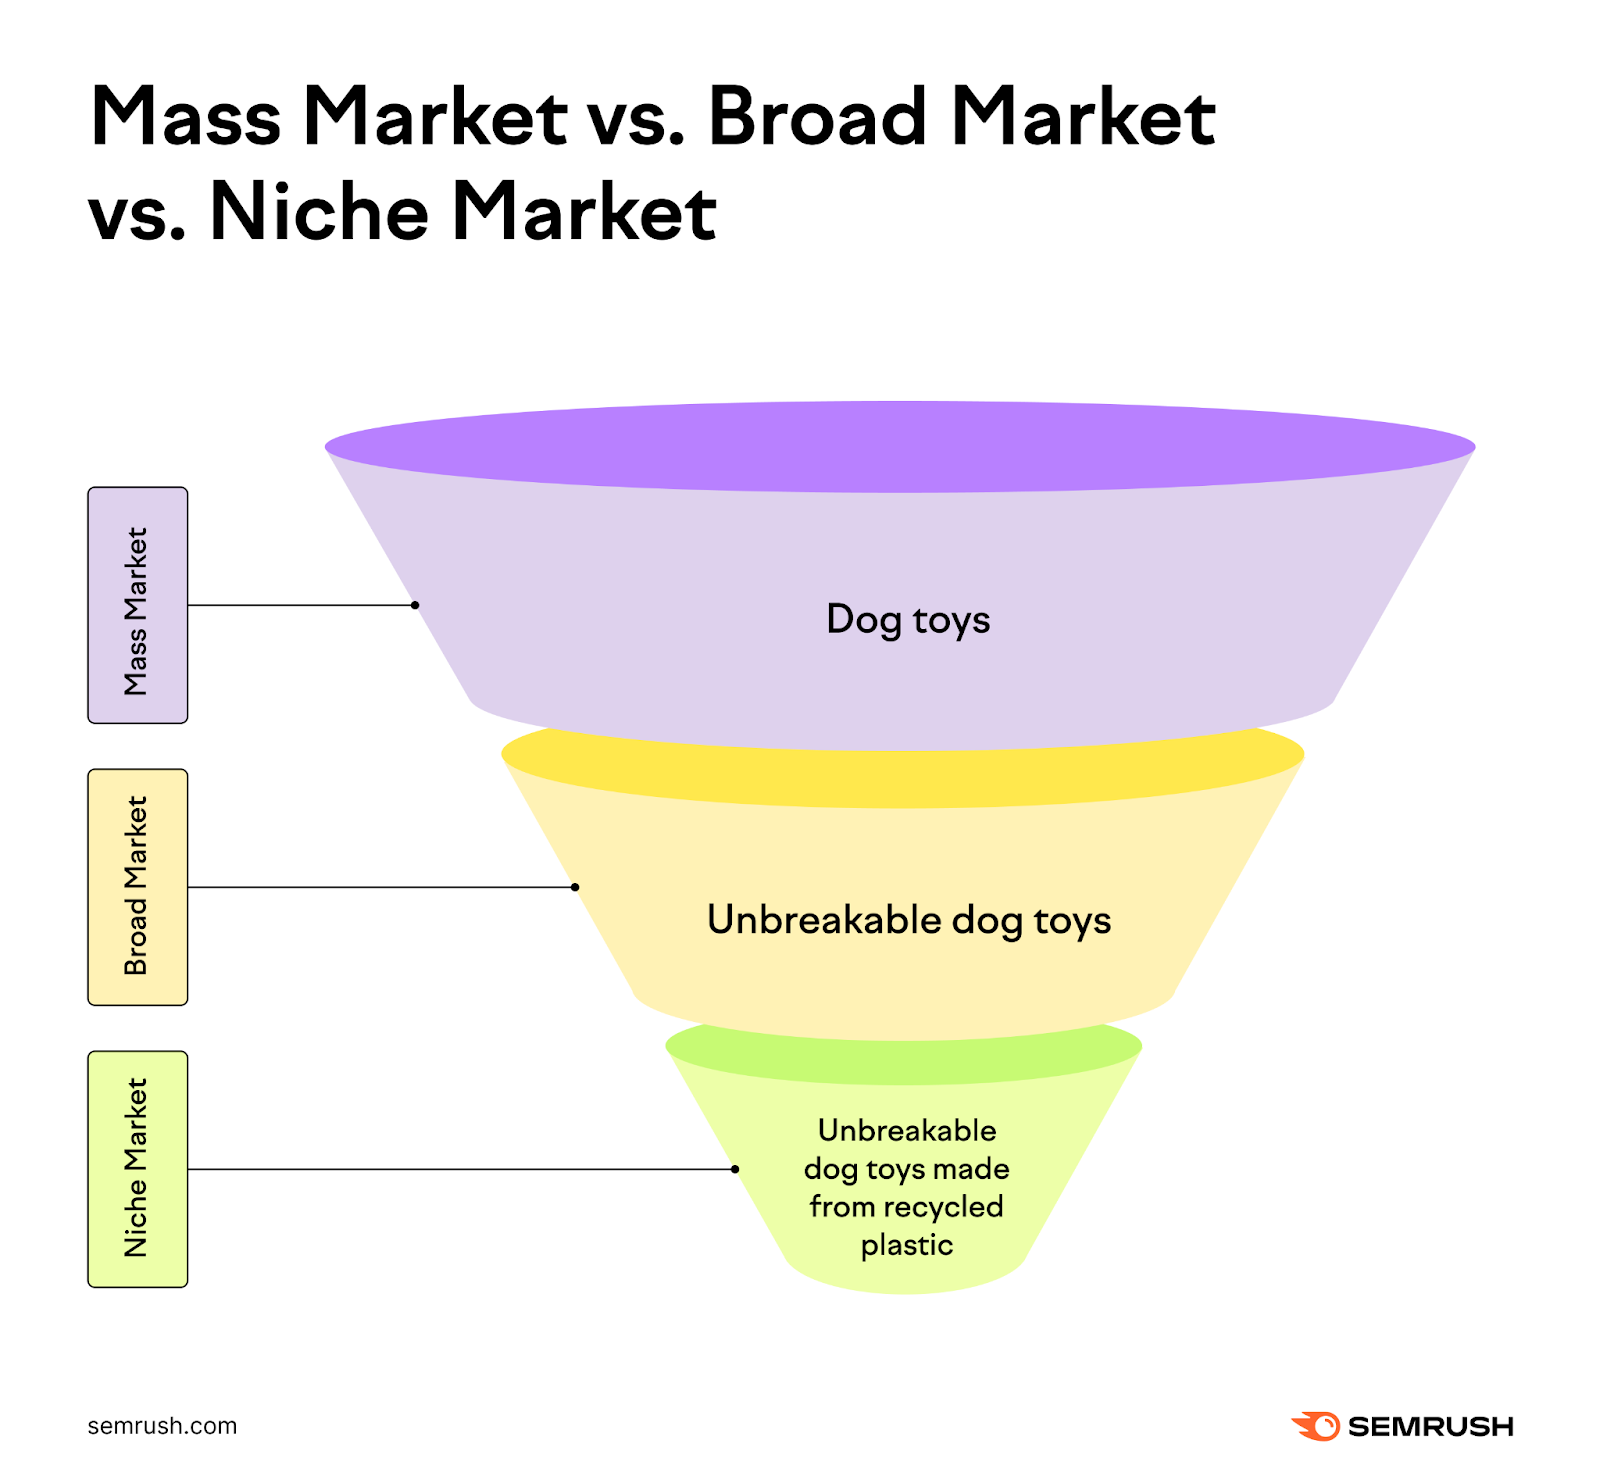 Funnel diagram with mass market widest at the top, broad market in the middle, and niche market as the smallest section at the bottom.